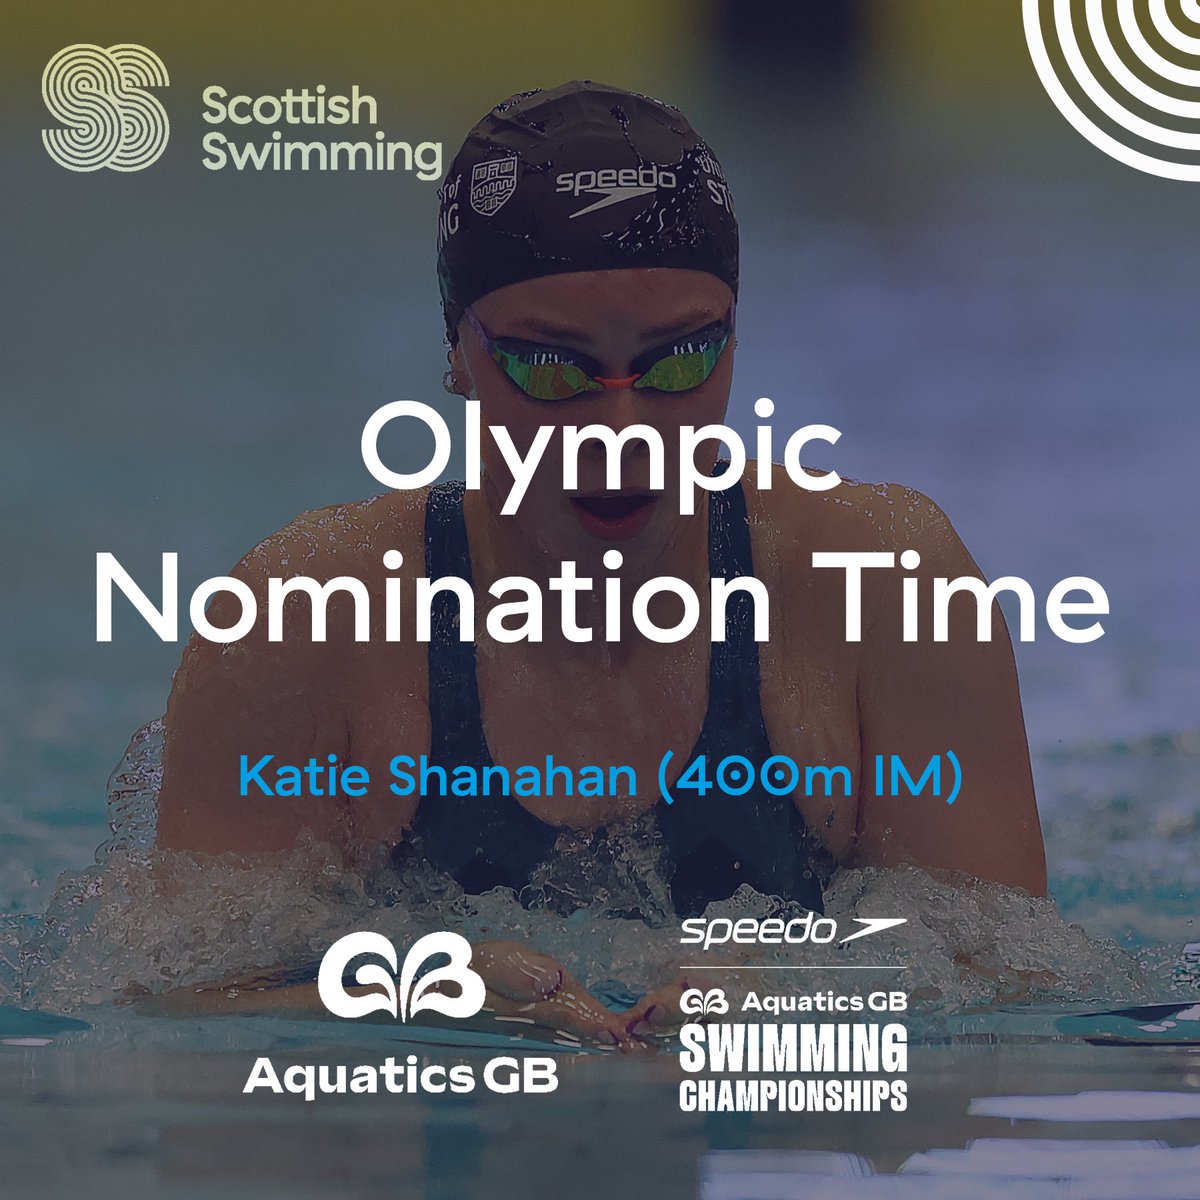 🚨Olympic Nomination Standard! Katie Shanahan (@UofSSwim) sets a time under the Olympic Nomination Standard in the 400m IM on her way to British silver 🥈 Congratulations Katie!! 🇫🇷